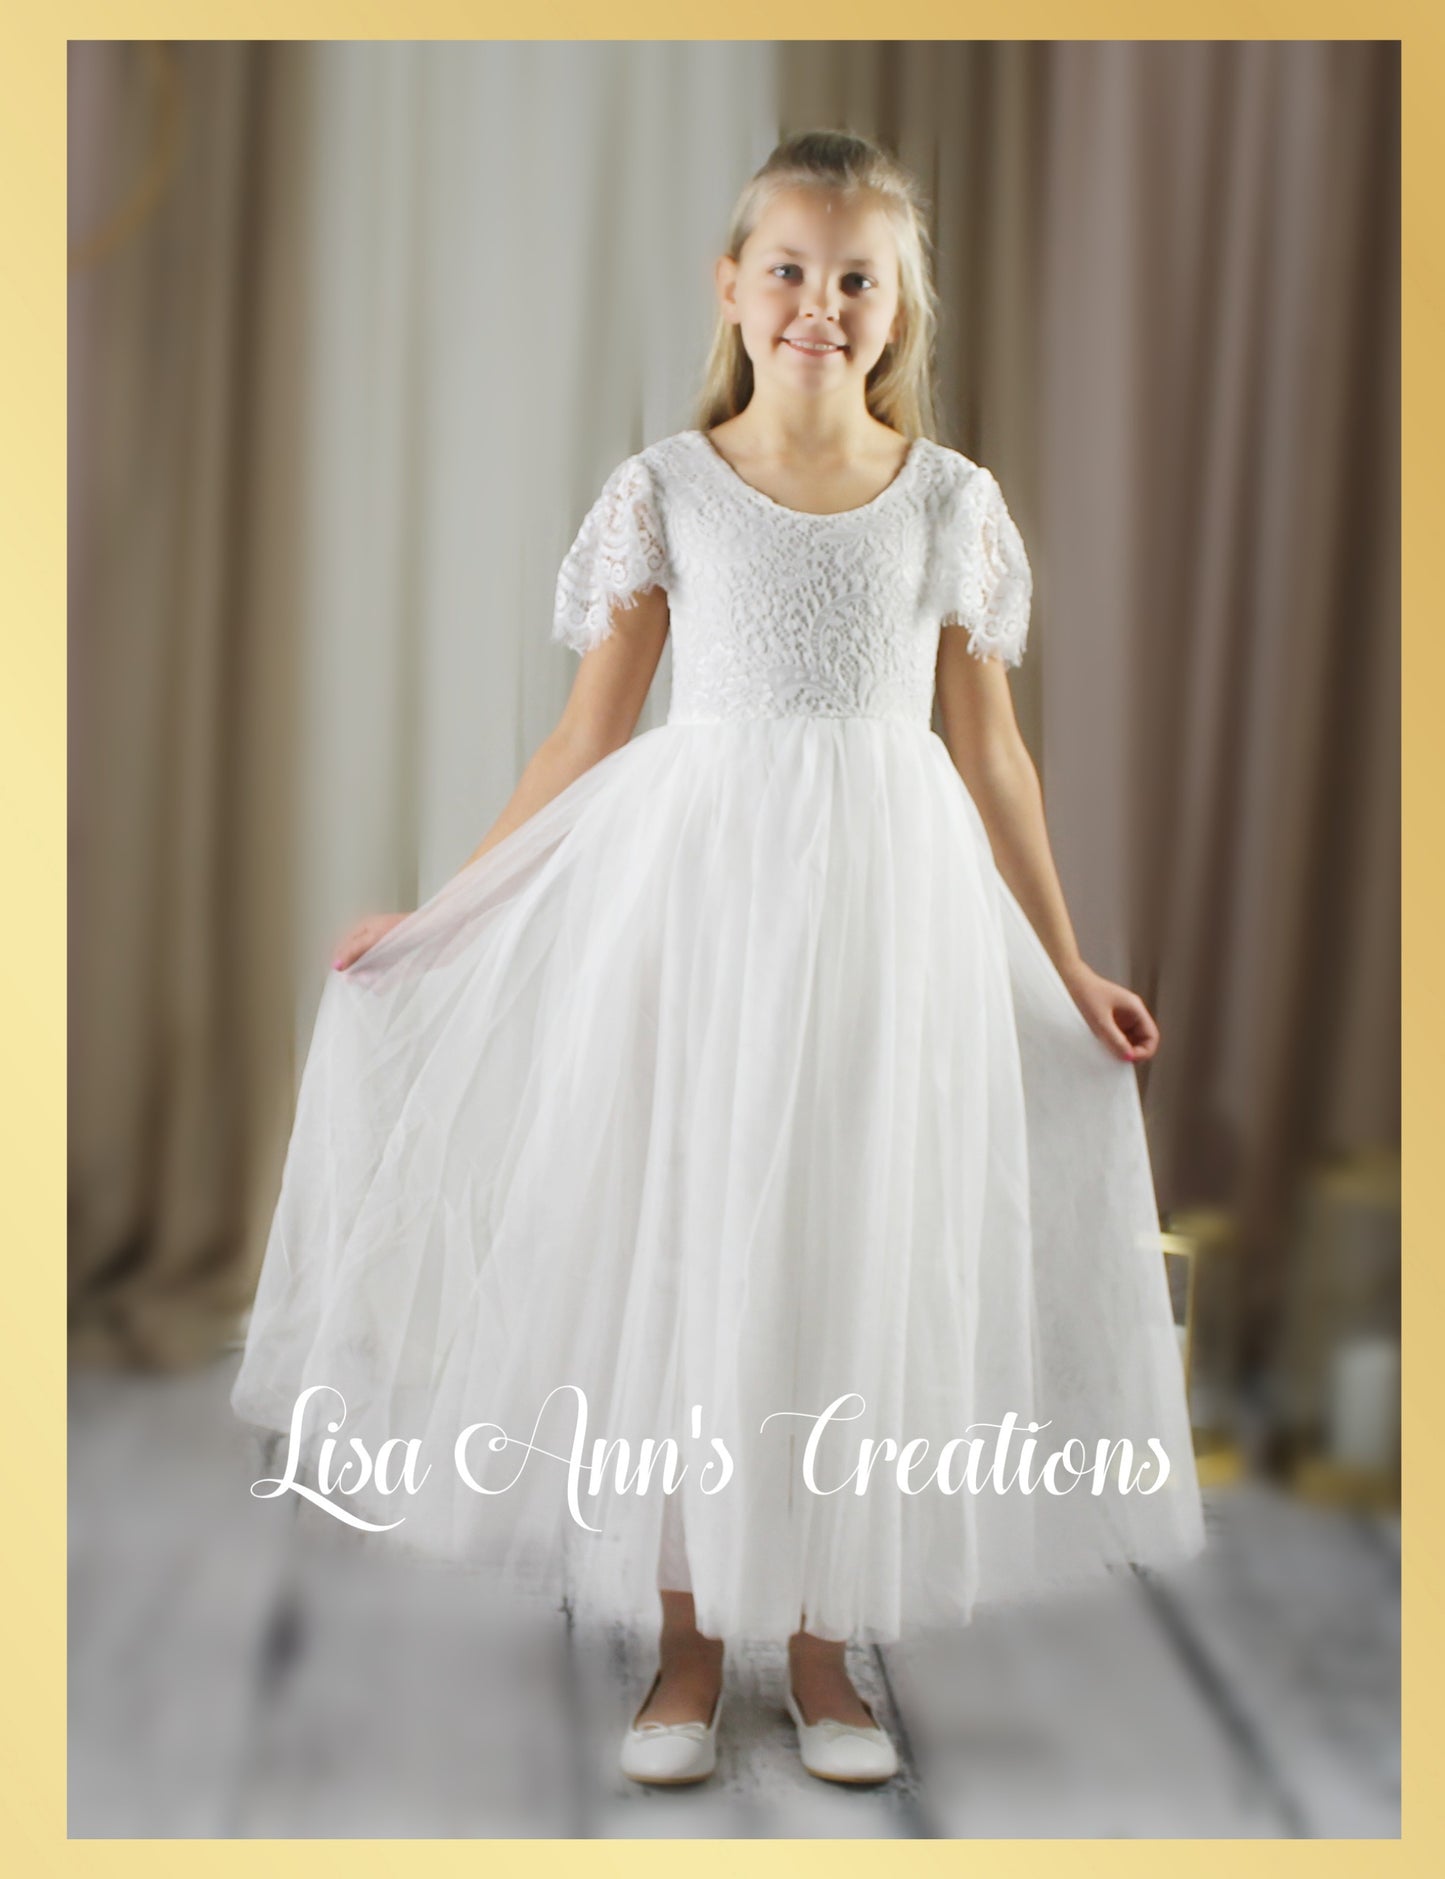 Flower Girl dress in white lace and tulle with cap sleeves